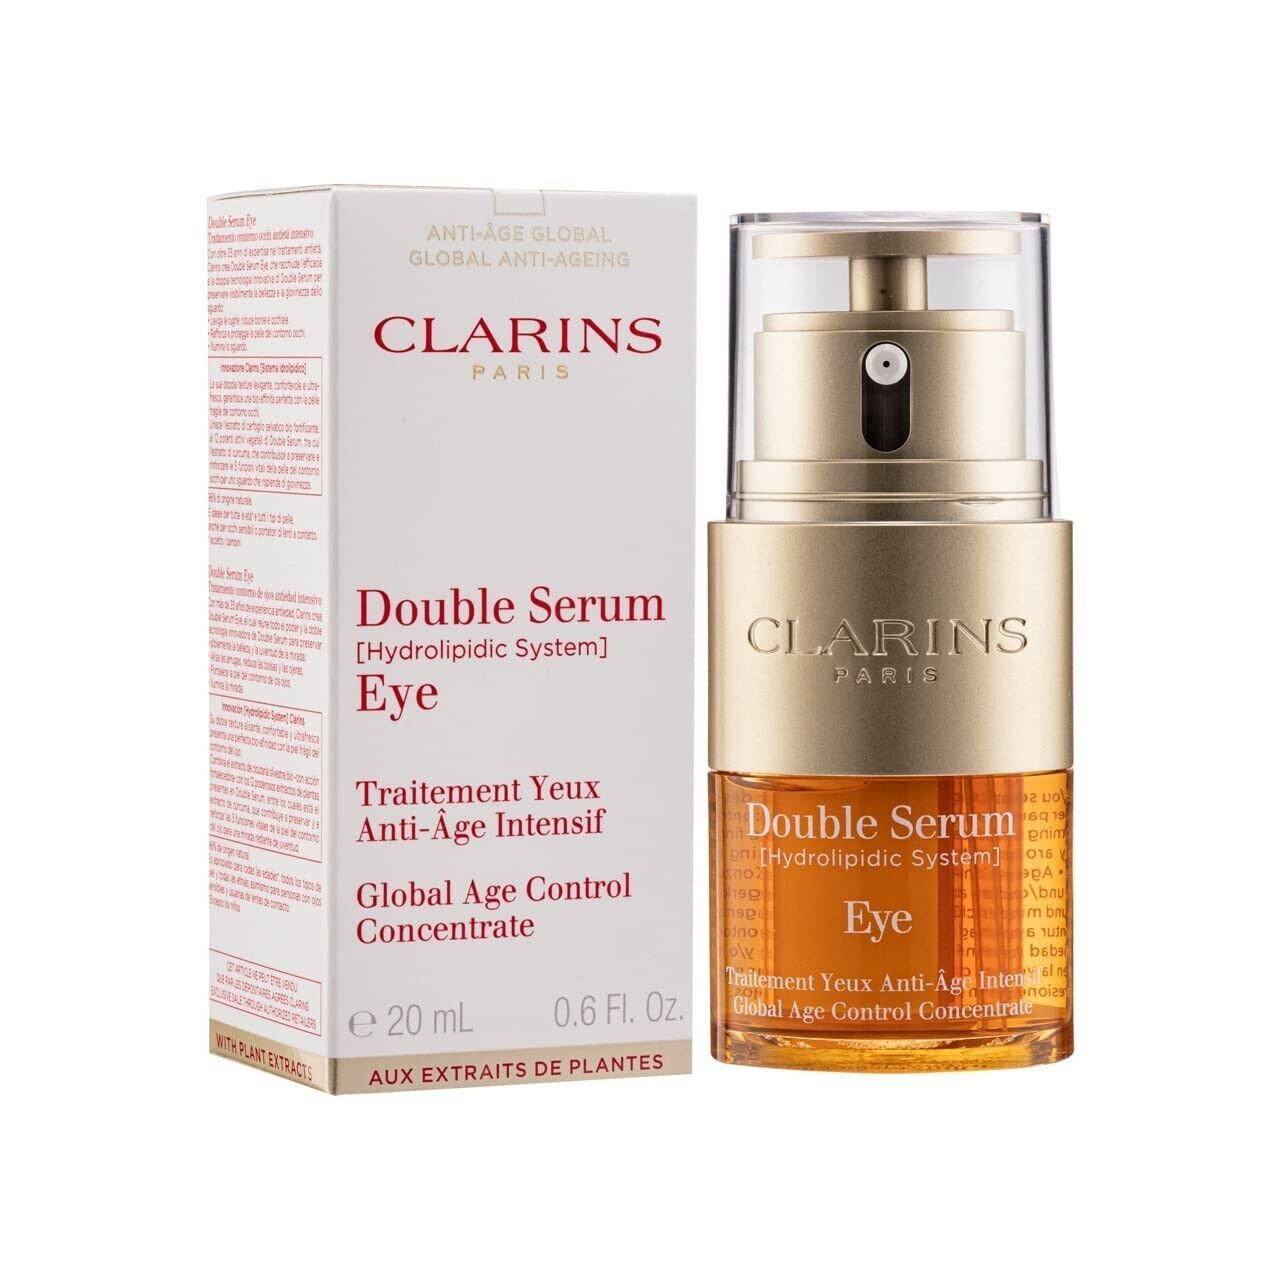 Clarins Double Serum EYE Complete age control concentrate 20ml BRAND NEW IN BOX - $61.70